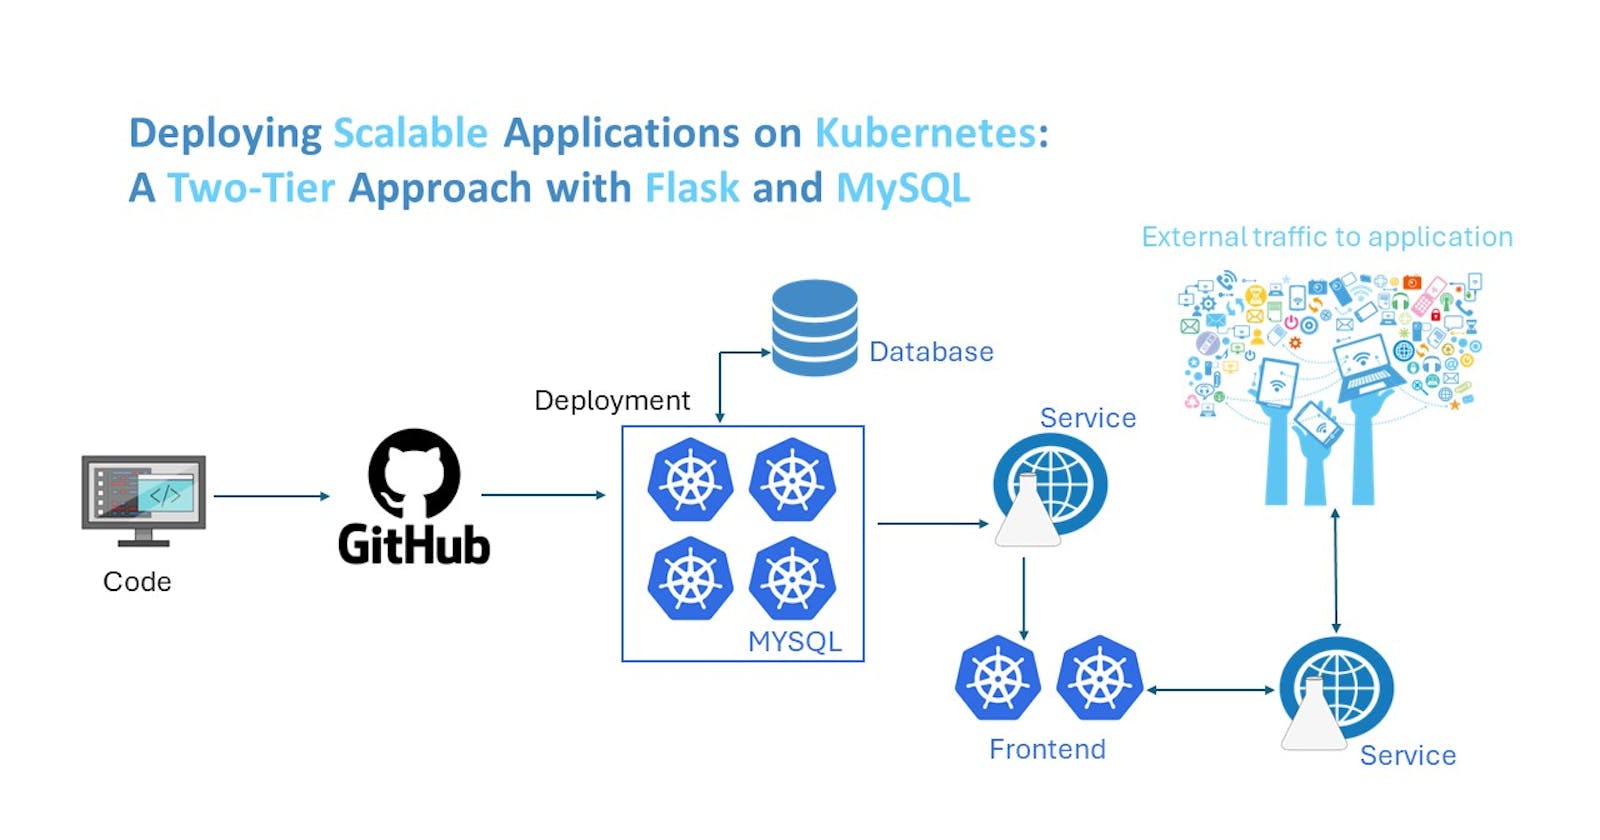 Setting Up Two-Tier Application Deployment on Kubernetes Cluster: A Step-by-Step Guide

Introduction: